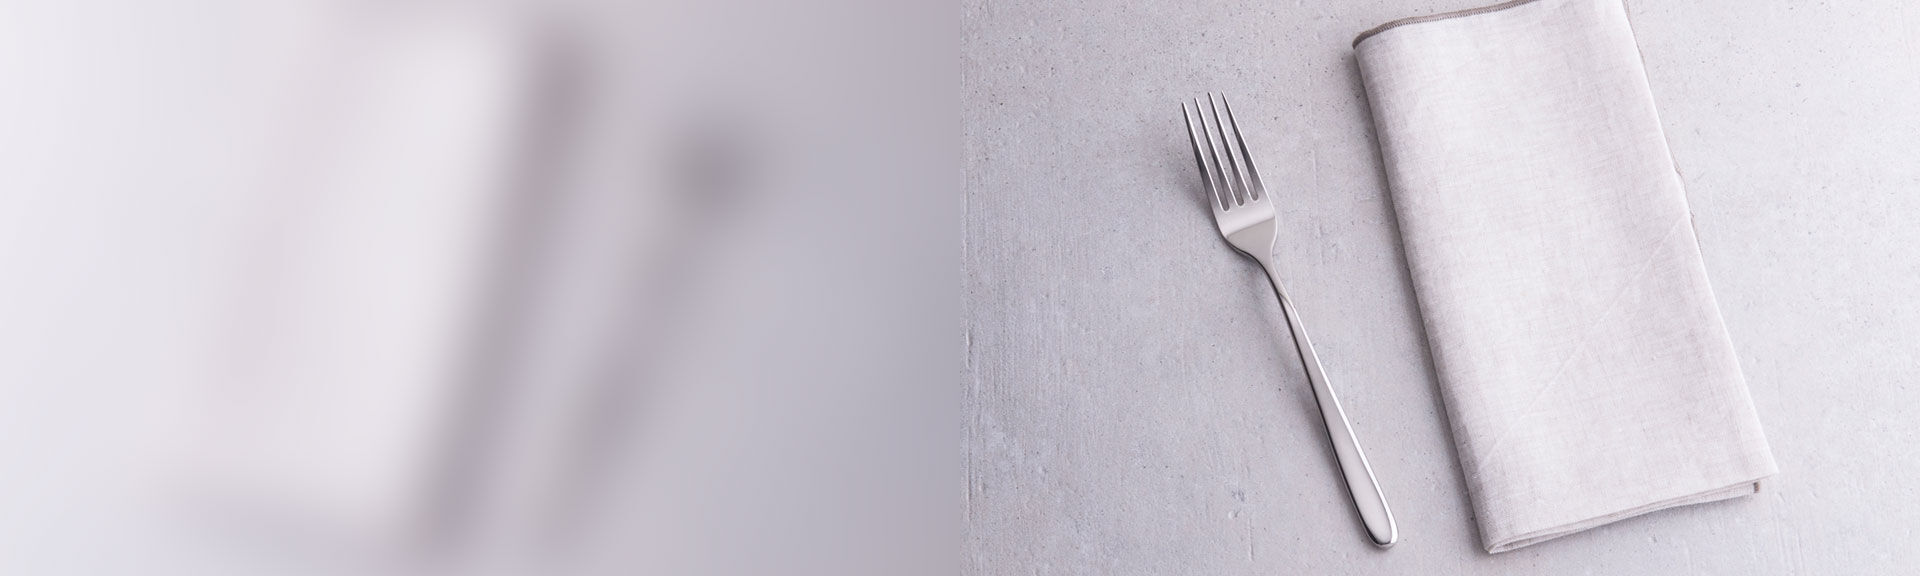 Stainless steel forks